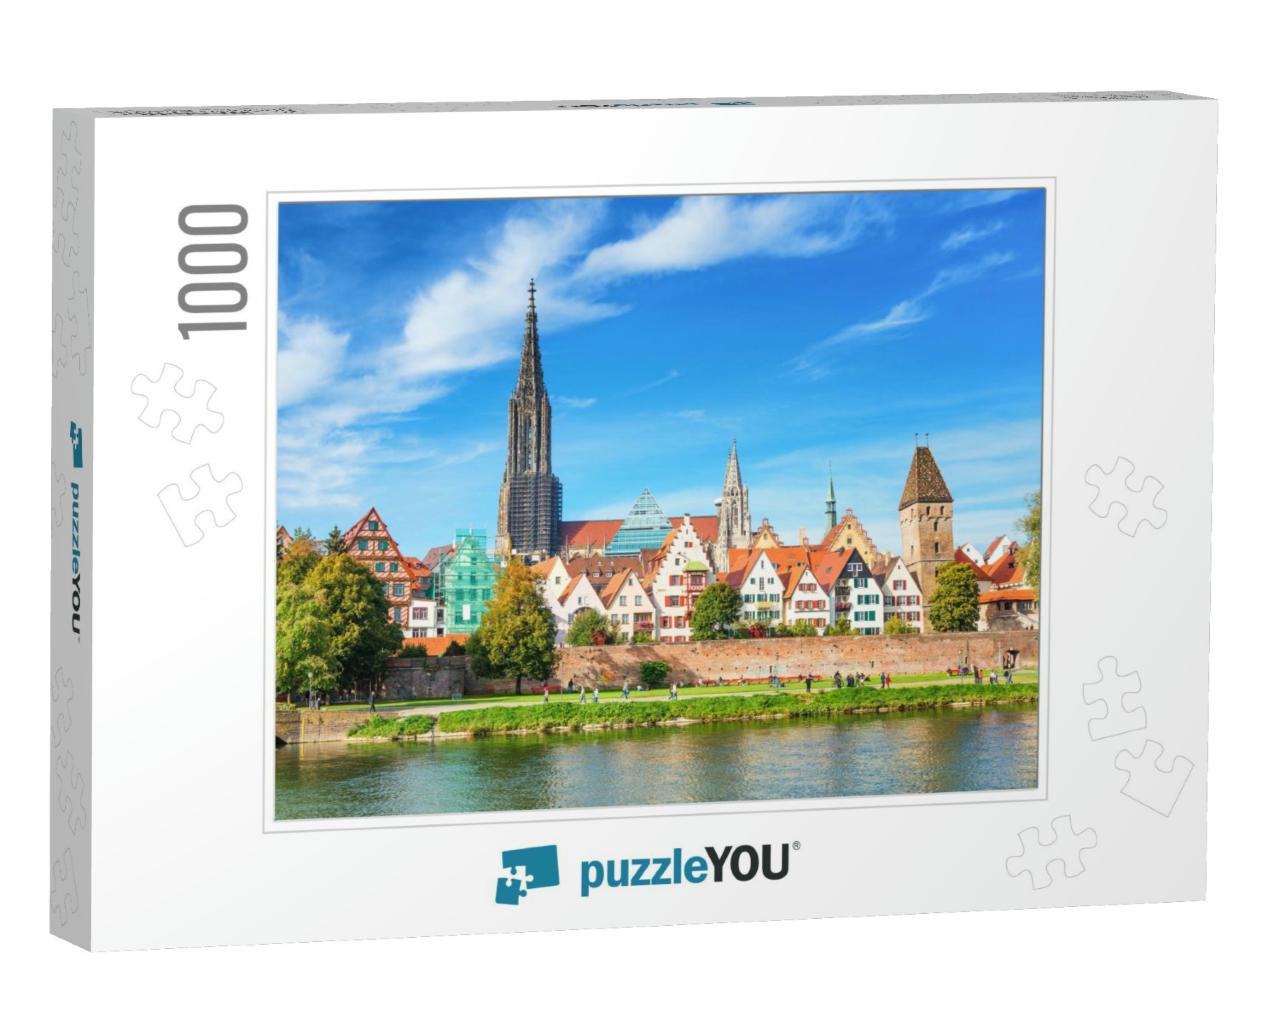 Ulm City Panorama, Germany... Jigsaw Puzzle with 1000 pieces